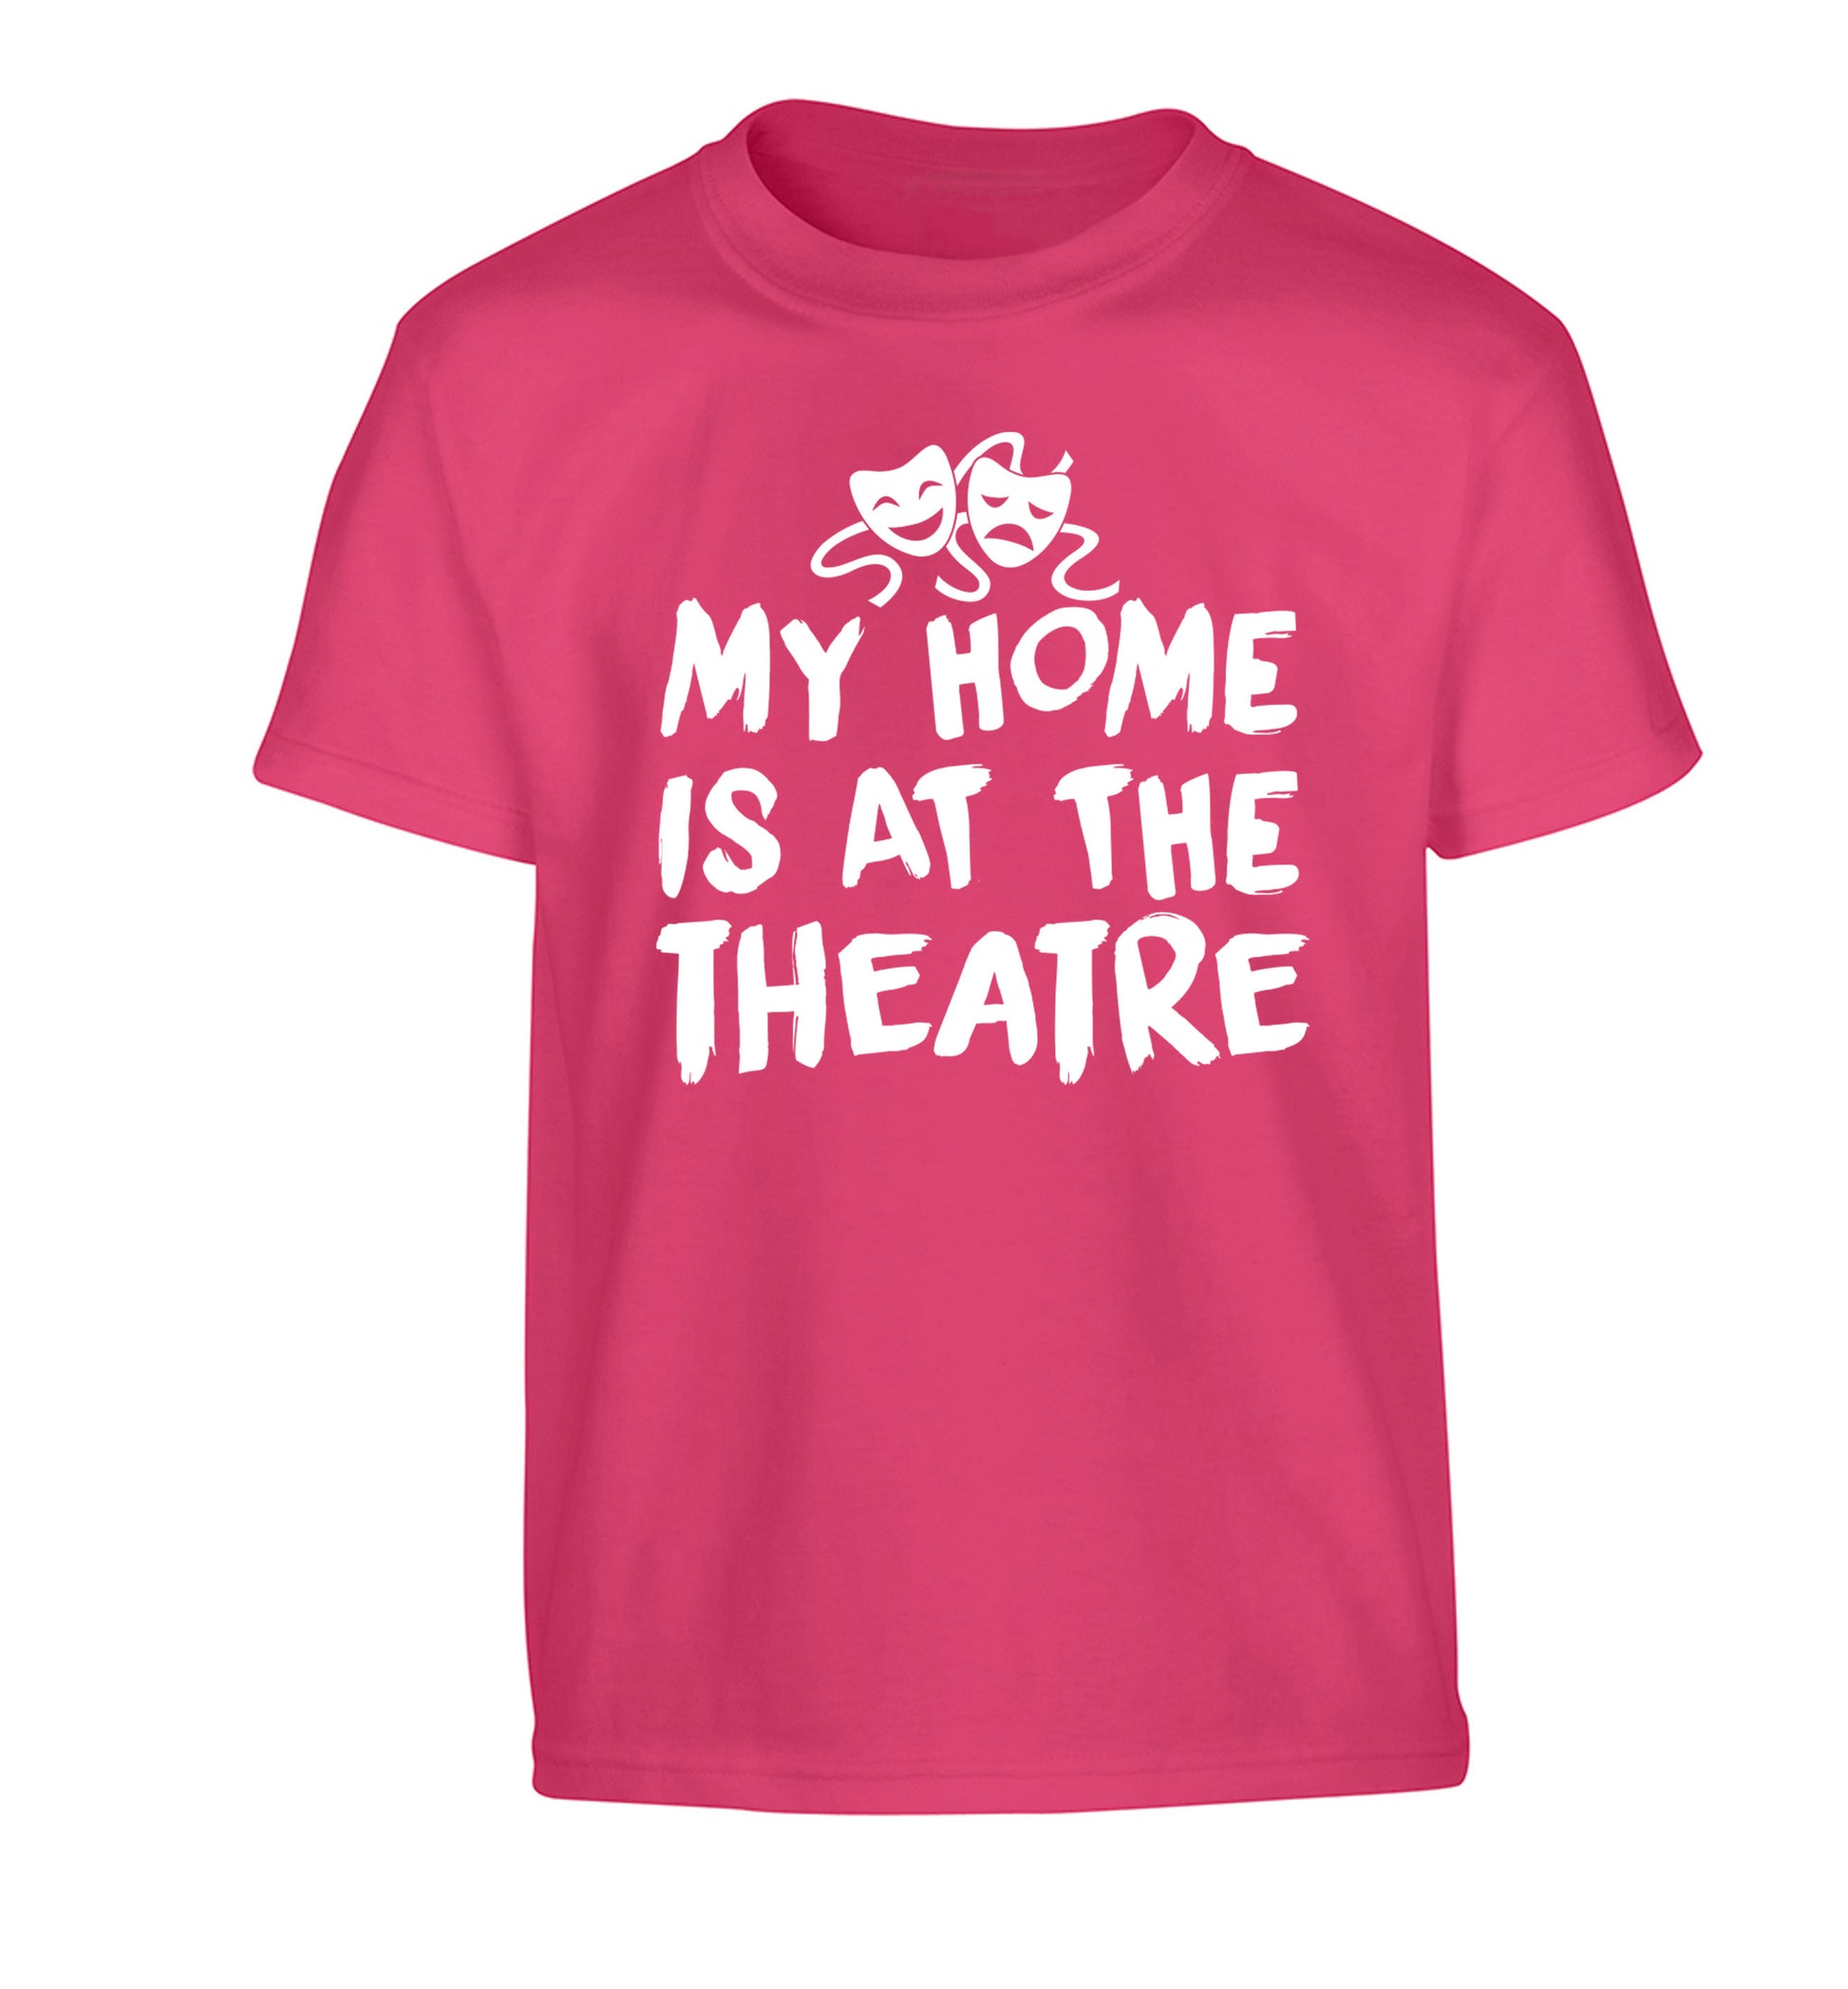 My home is at the theatre Children's pink Tshirt 12-14 Years